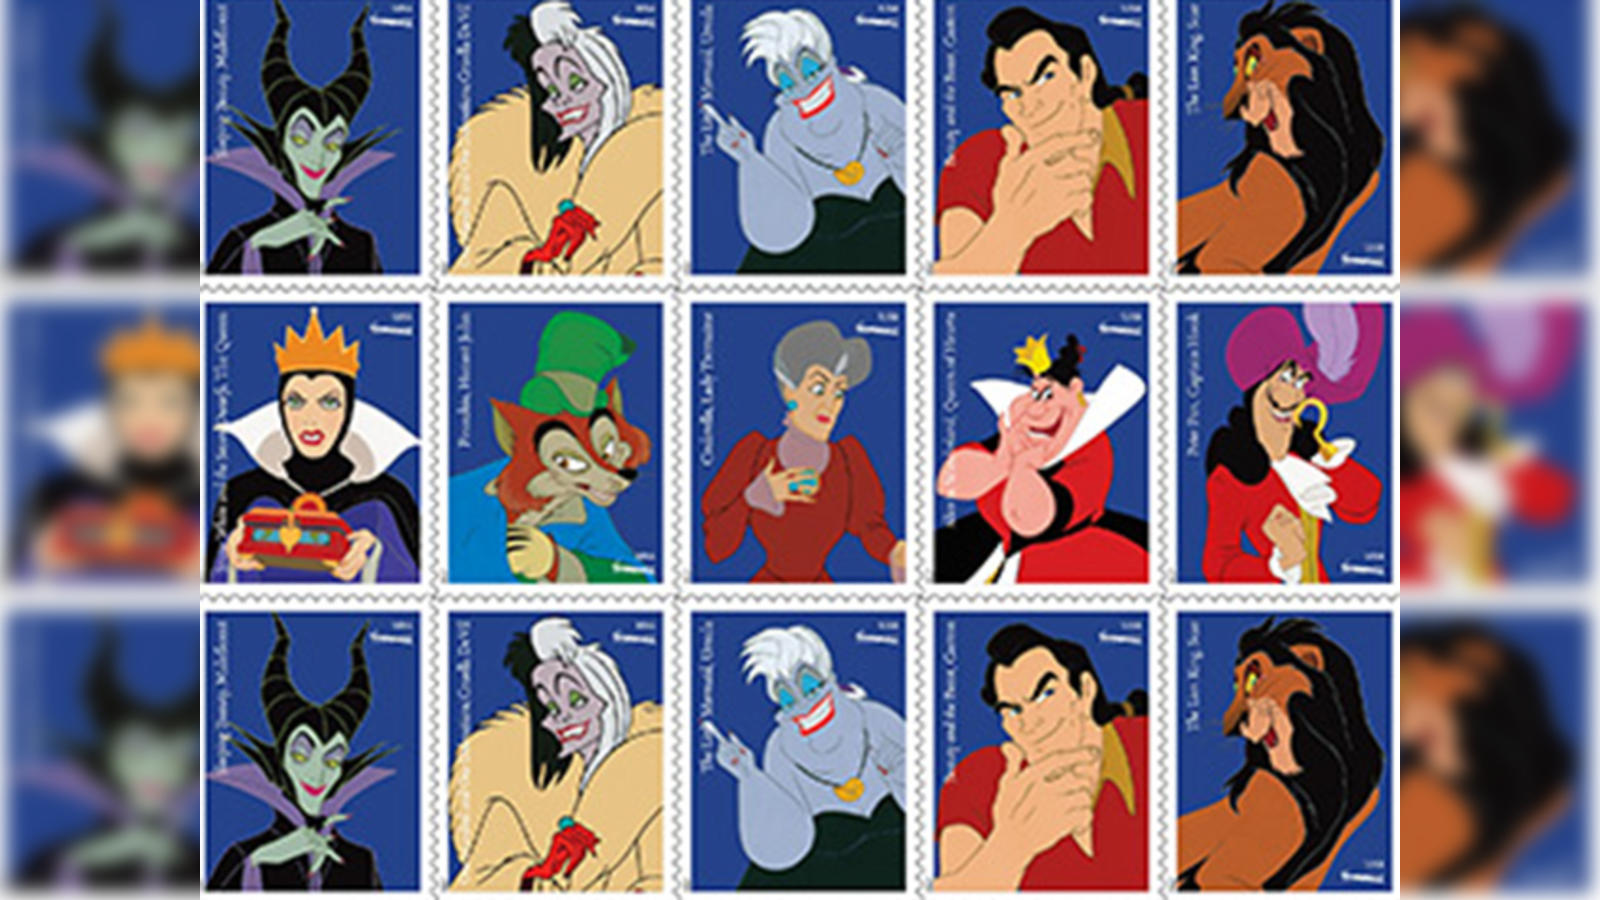 From Scar to Captain Hook, Disney villains now immortalised on US